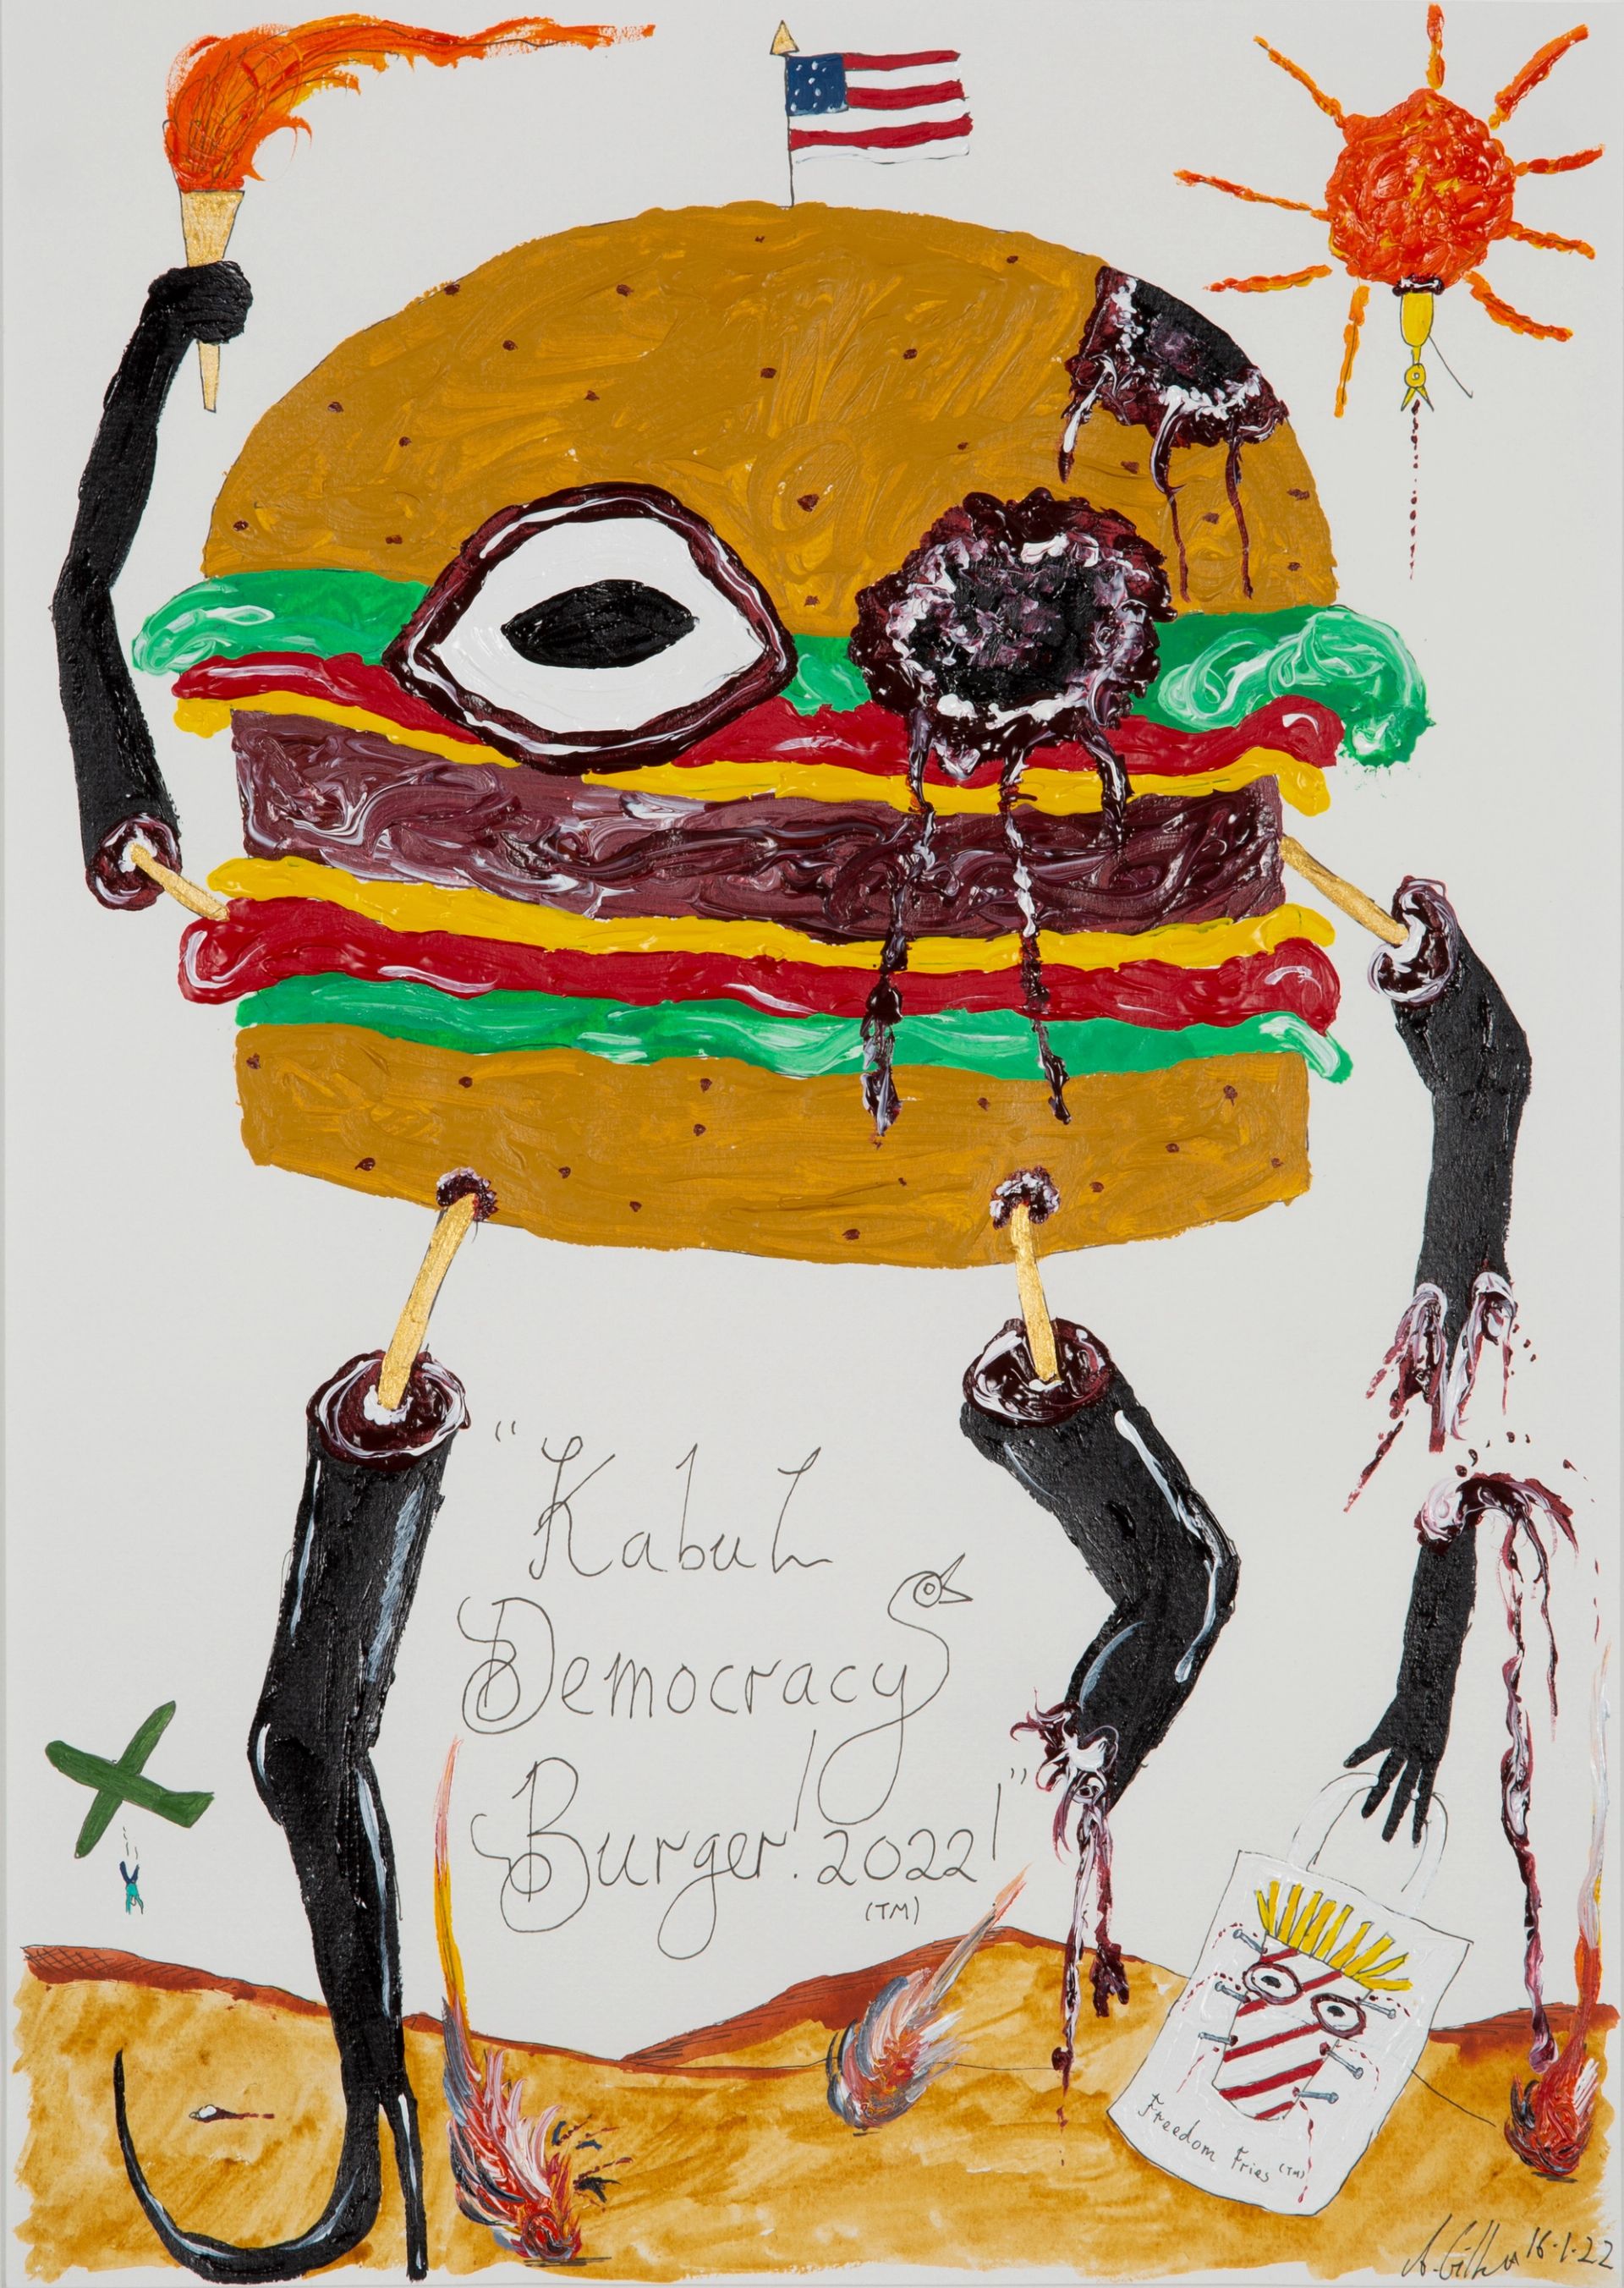 Andrew Gilbert, Kabul Democracy Burger! 2022!, Courtesy of the artist and Sperling, Photographer: Constanza Meléndez